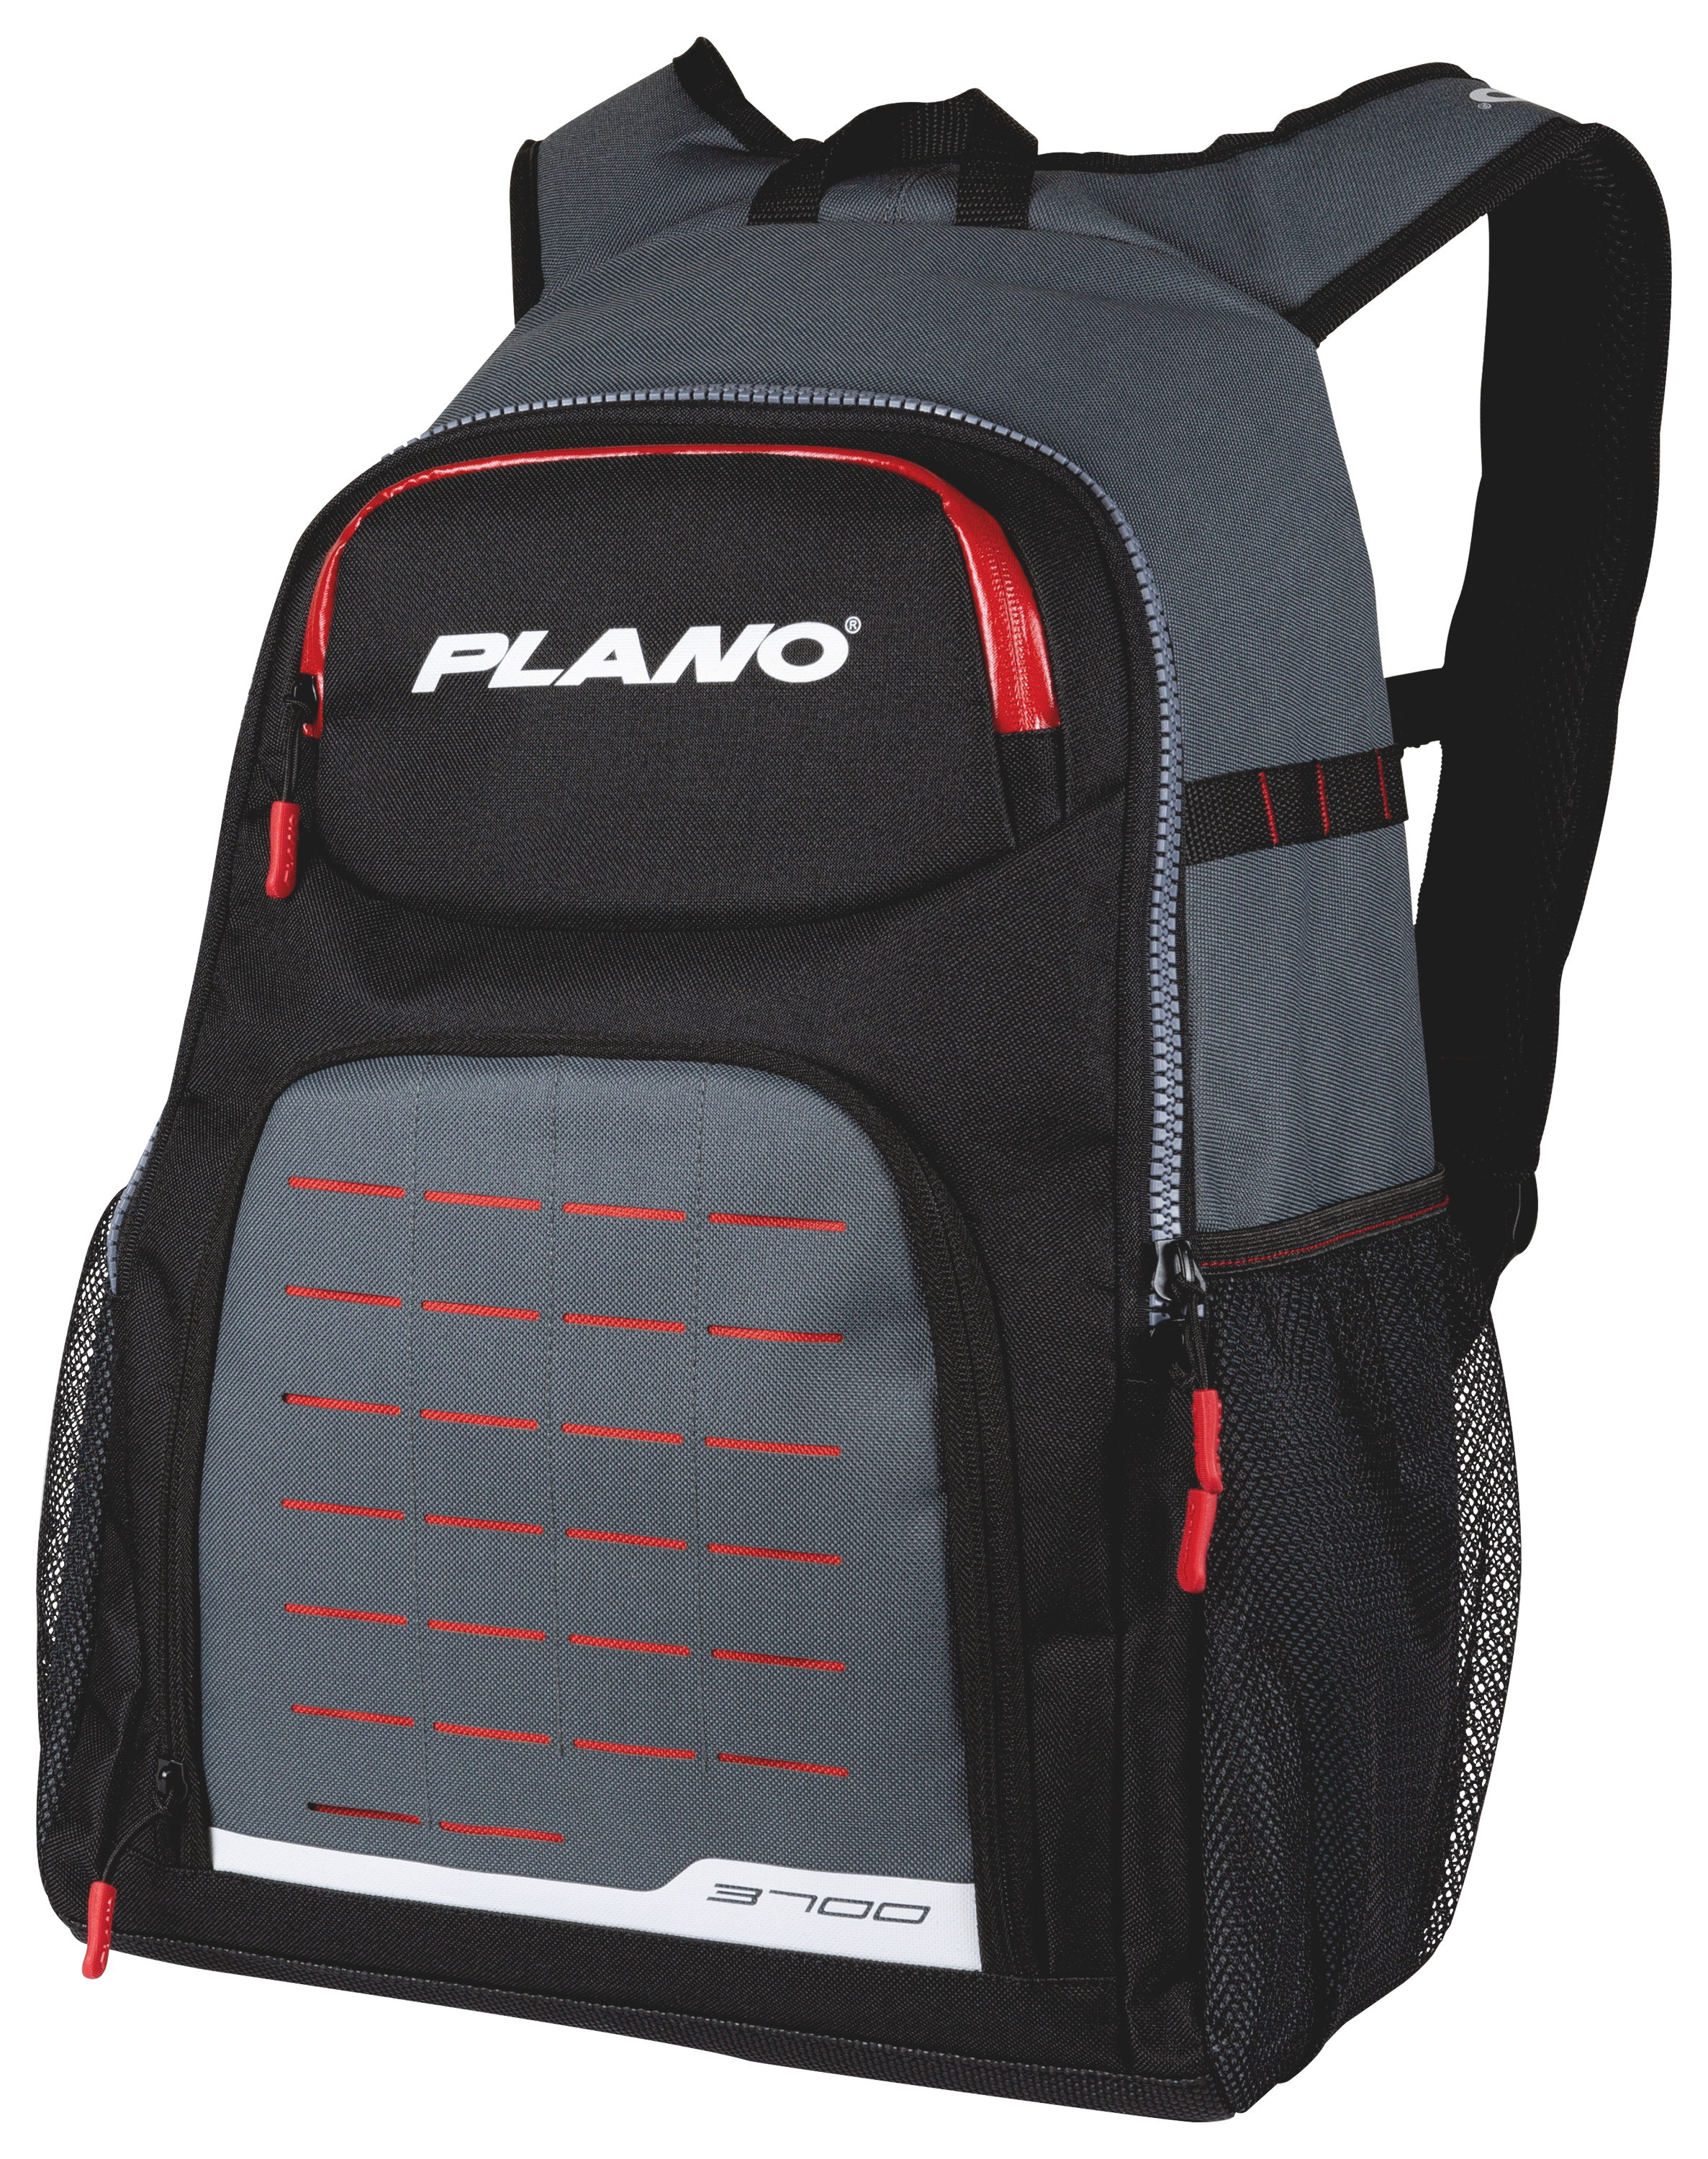 Plano Fishing Tackle Bags Fishing & Boating Clearance in Sports & Outdoors  Clearance 